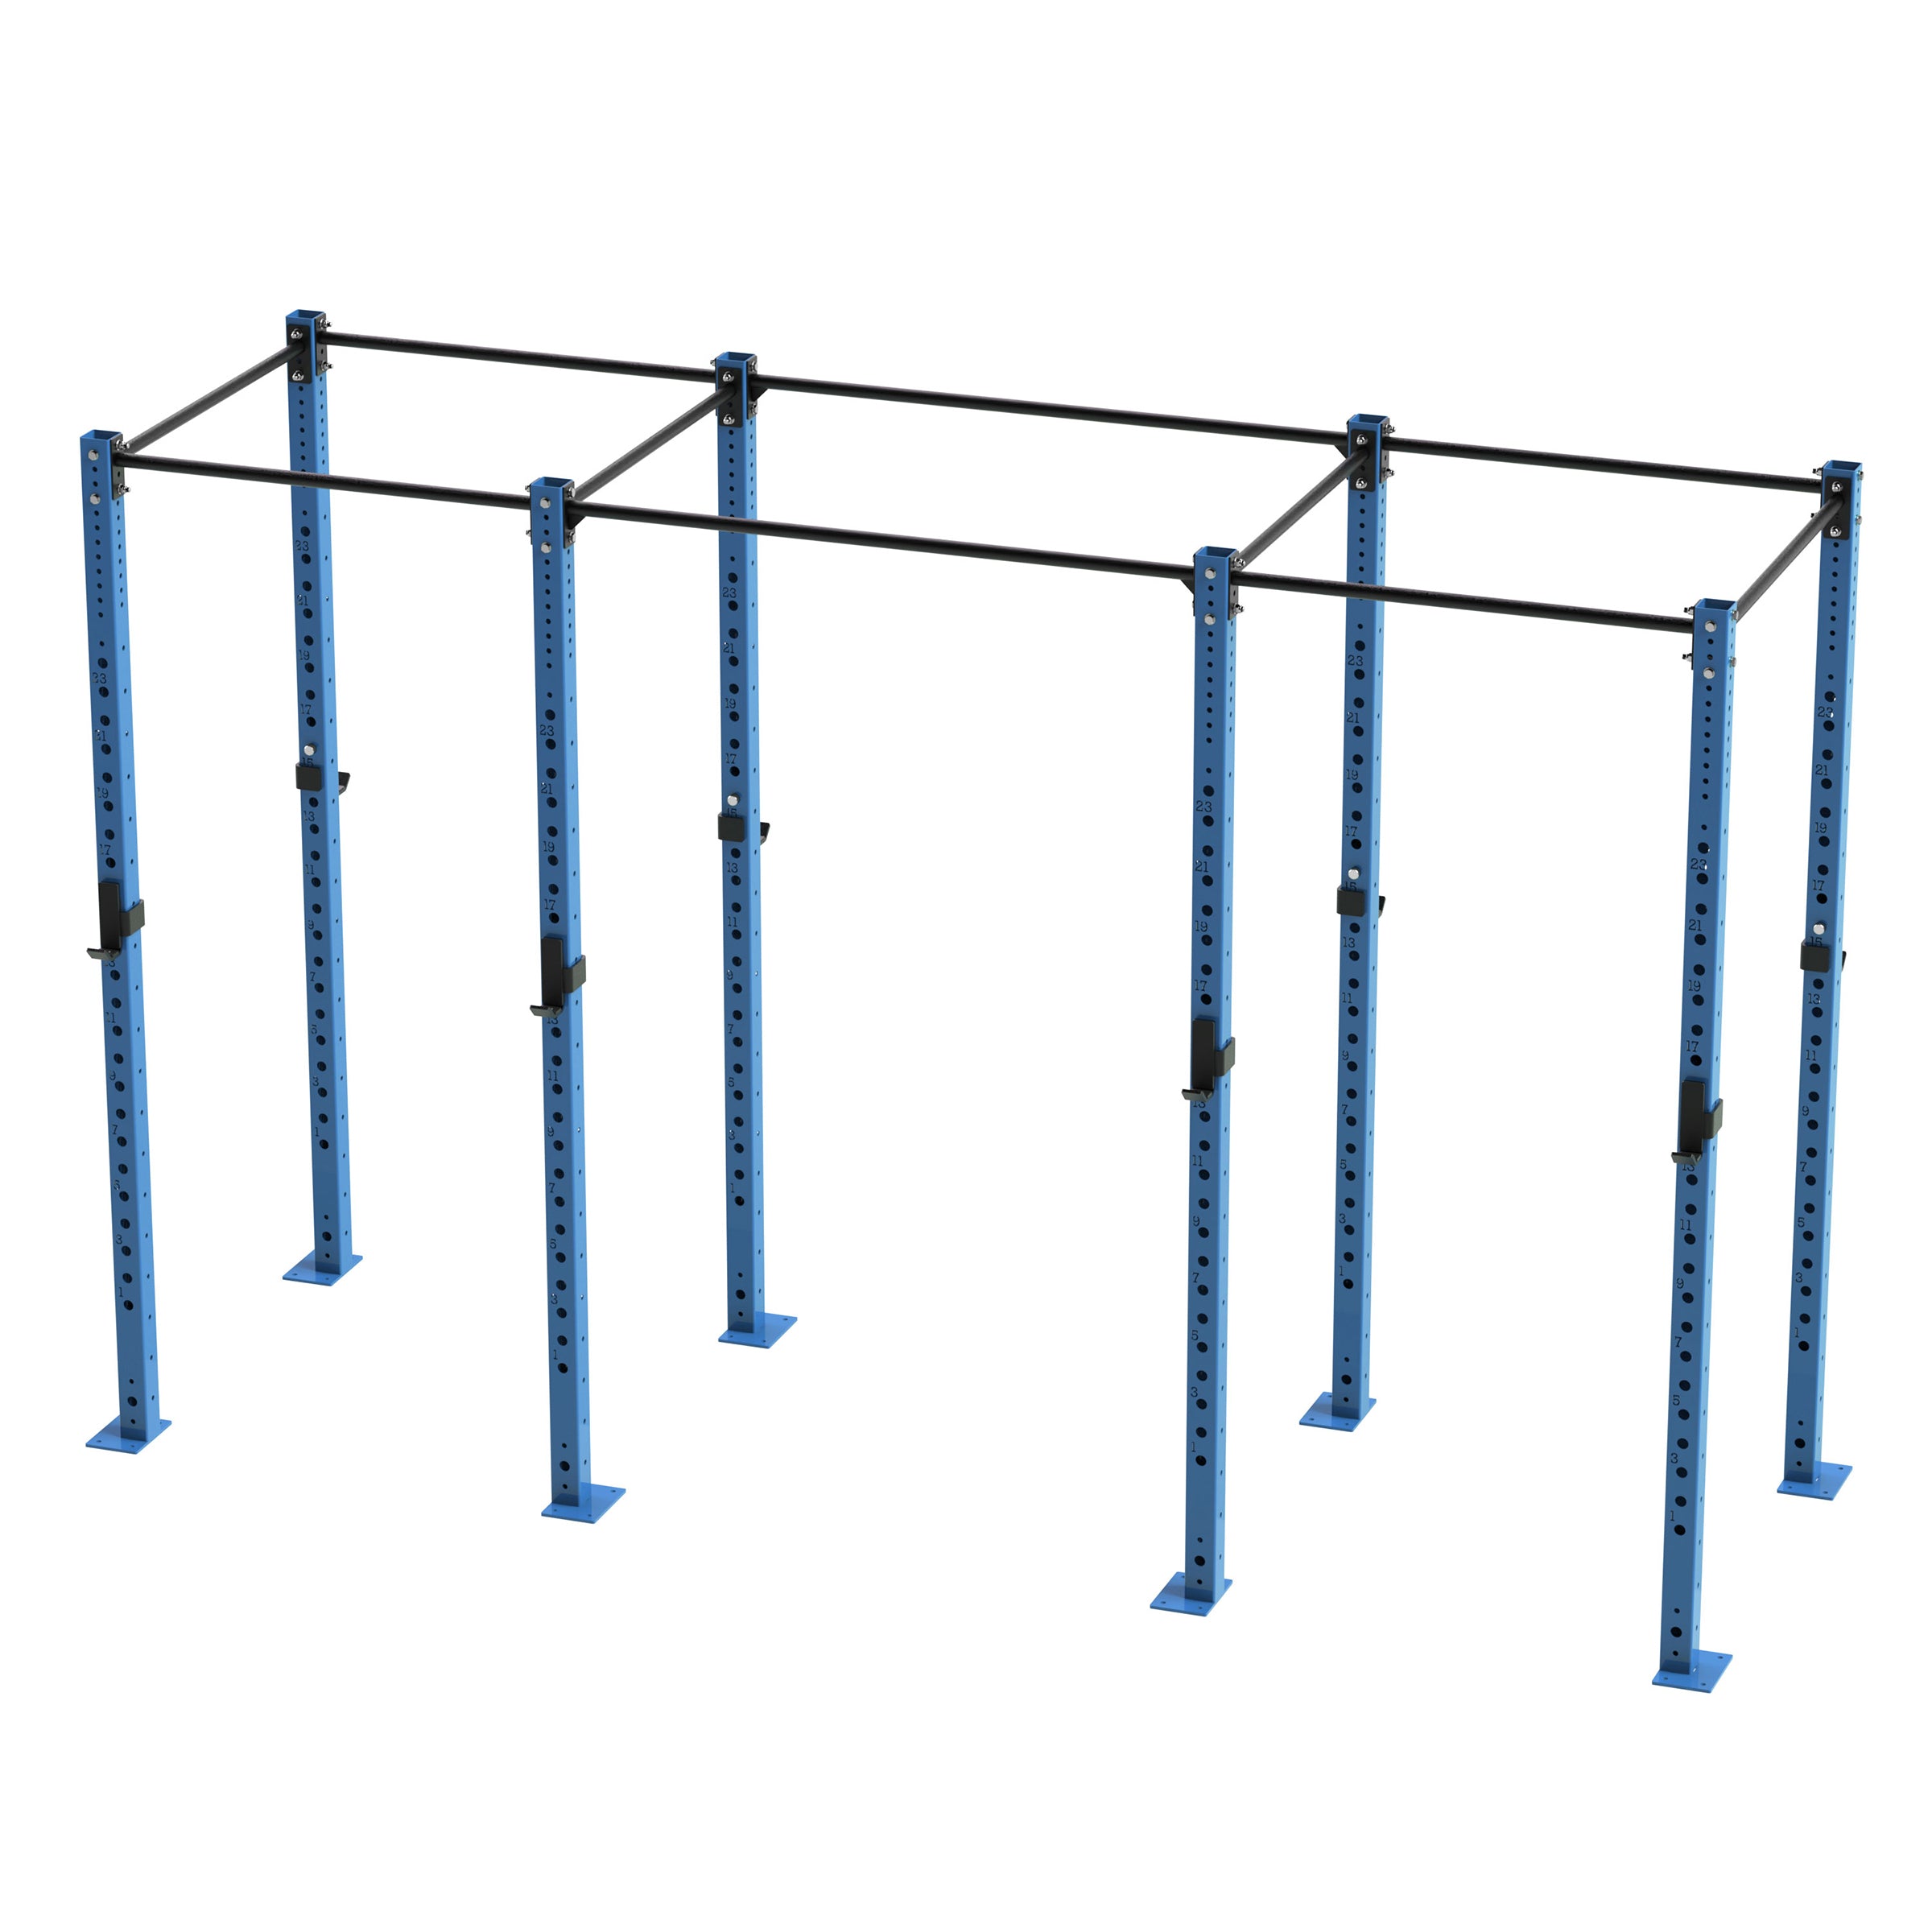 Bison Series - 4 Bay Freestanding Rig - Wolverson Fitness